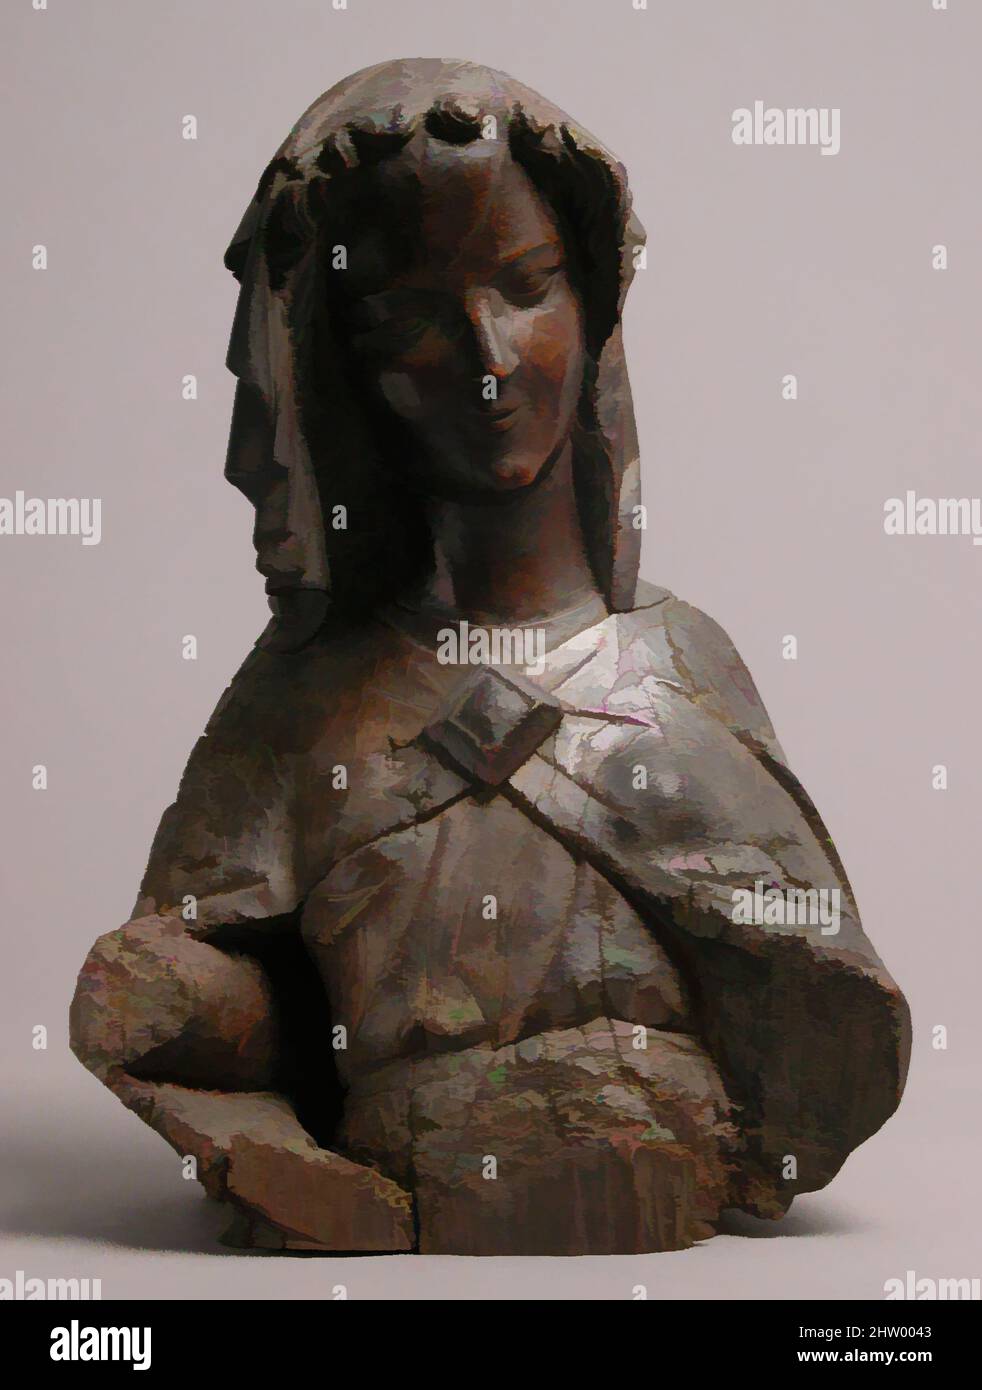 https://c8.alamy.com/comp/2HW0043/art-inspired-by-bust-of-a-women-14th-century-french-oak-overall-13-34-x-9-12-x-6-18-in-349-x-242-x-155-cm-sculpture-wood-classic-works-modernized-by-artotop-with-a-splash-of-modernity-shapes-color-and-value-eye-catching-visual-impact-on-art-emotions-through-freedom-of-artworks-in-a-contemporary-way-a-timeless-message-pursuing-a-wildly-creative-new-direction-artists-turning-to-the-digital-medium-and-creating-the-artotop-nft-2HW0043.jpg